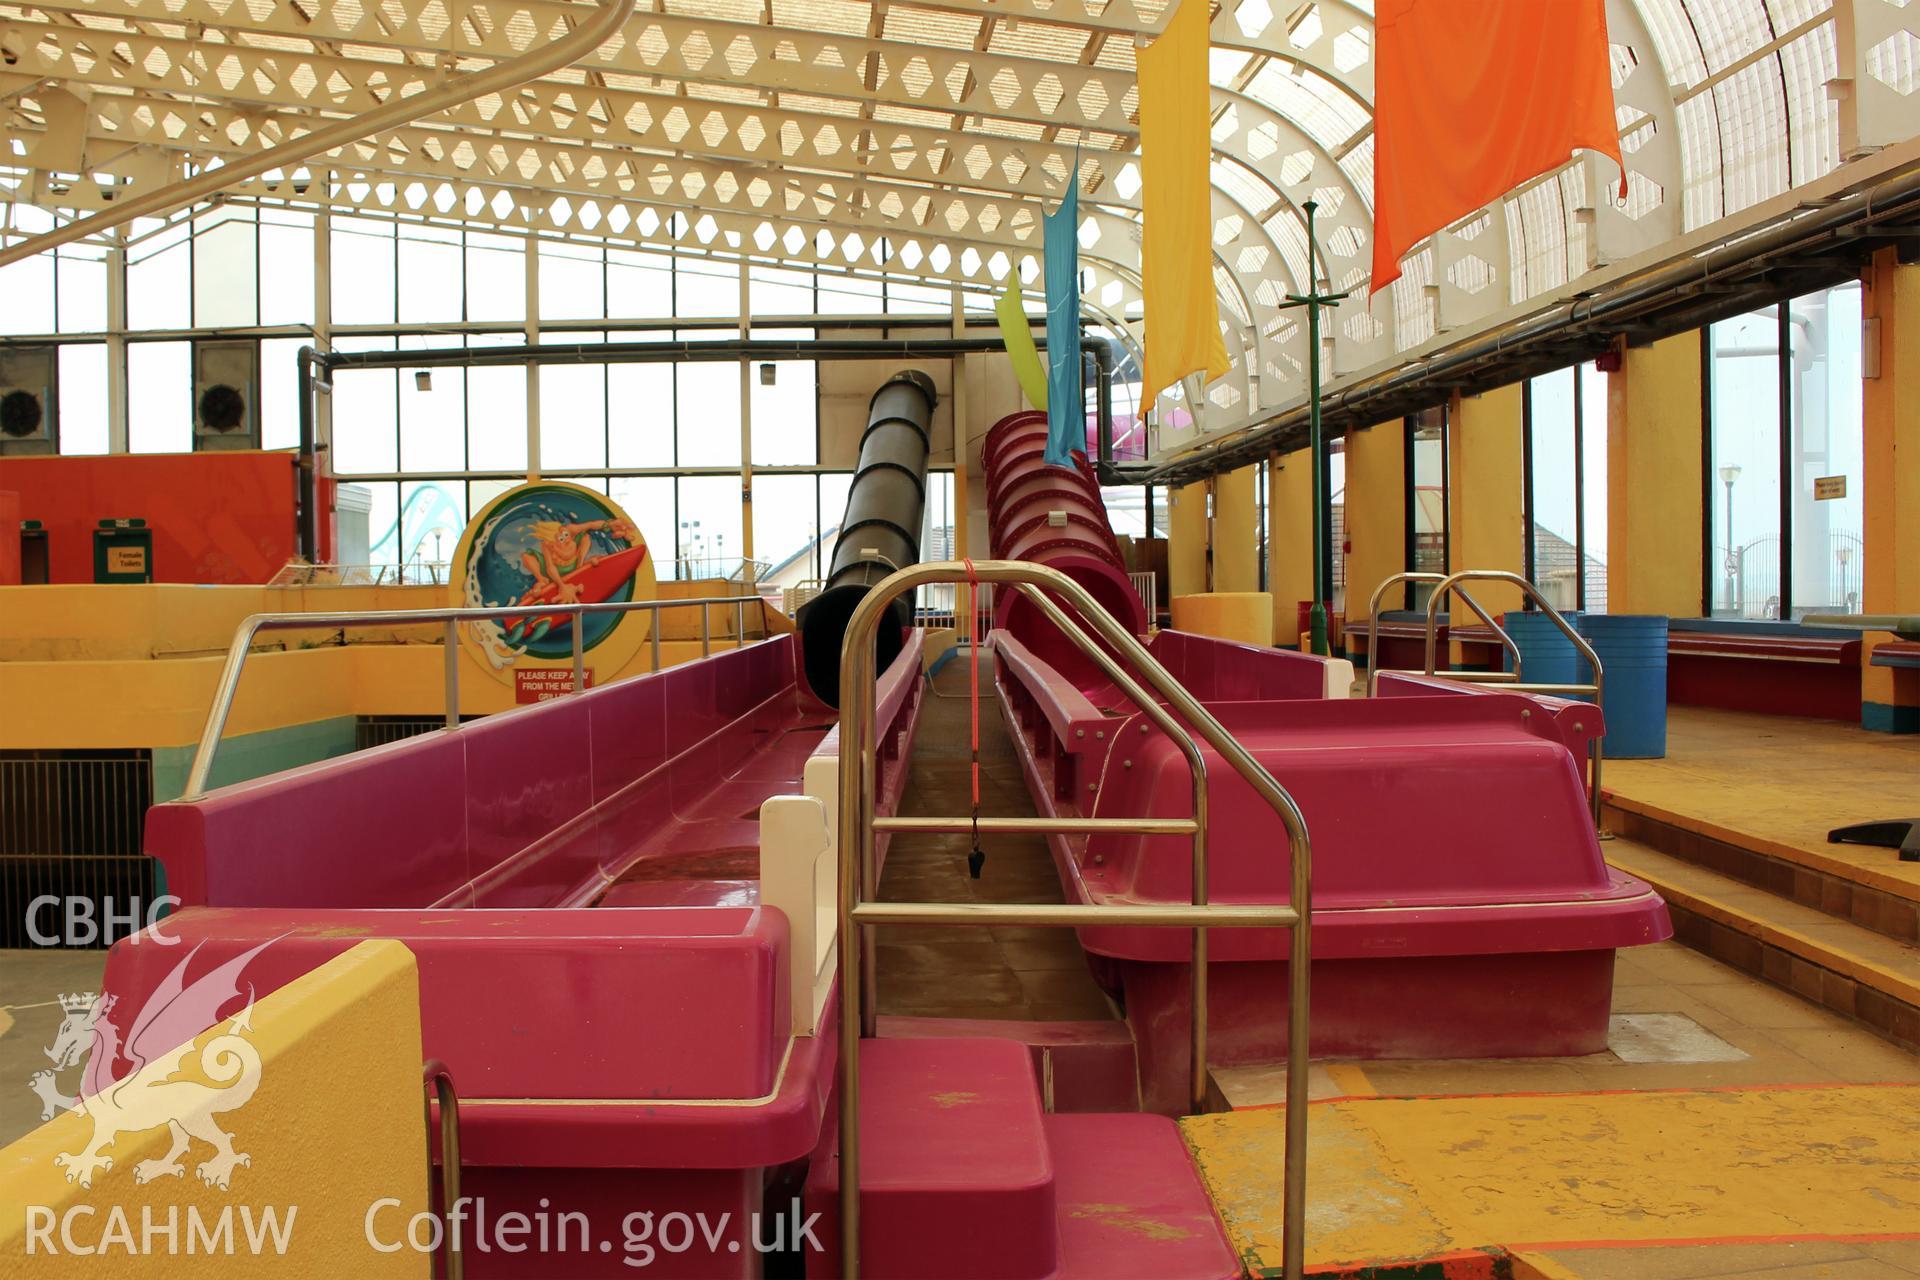 Slides at Rhyl Sun Centre, taken by Sue Fielding, 27th May 2016.